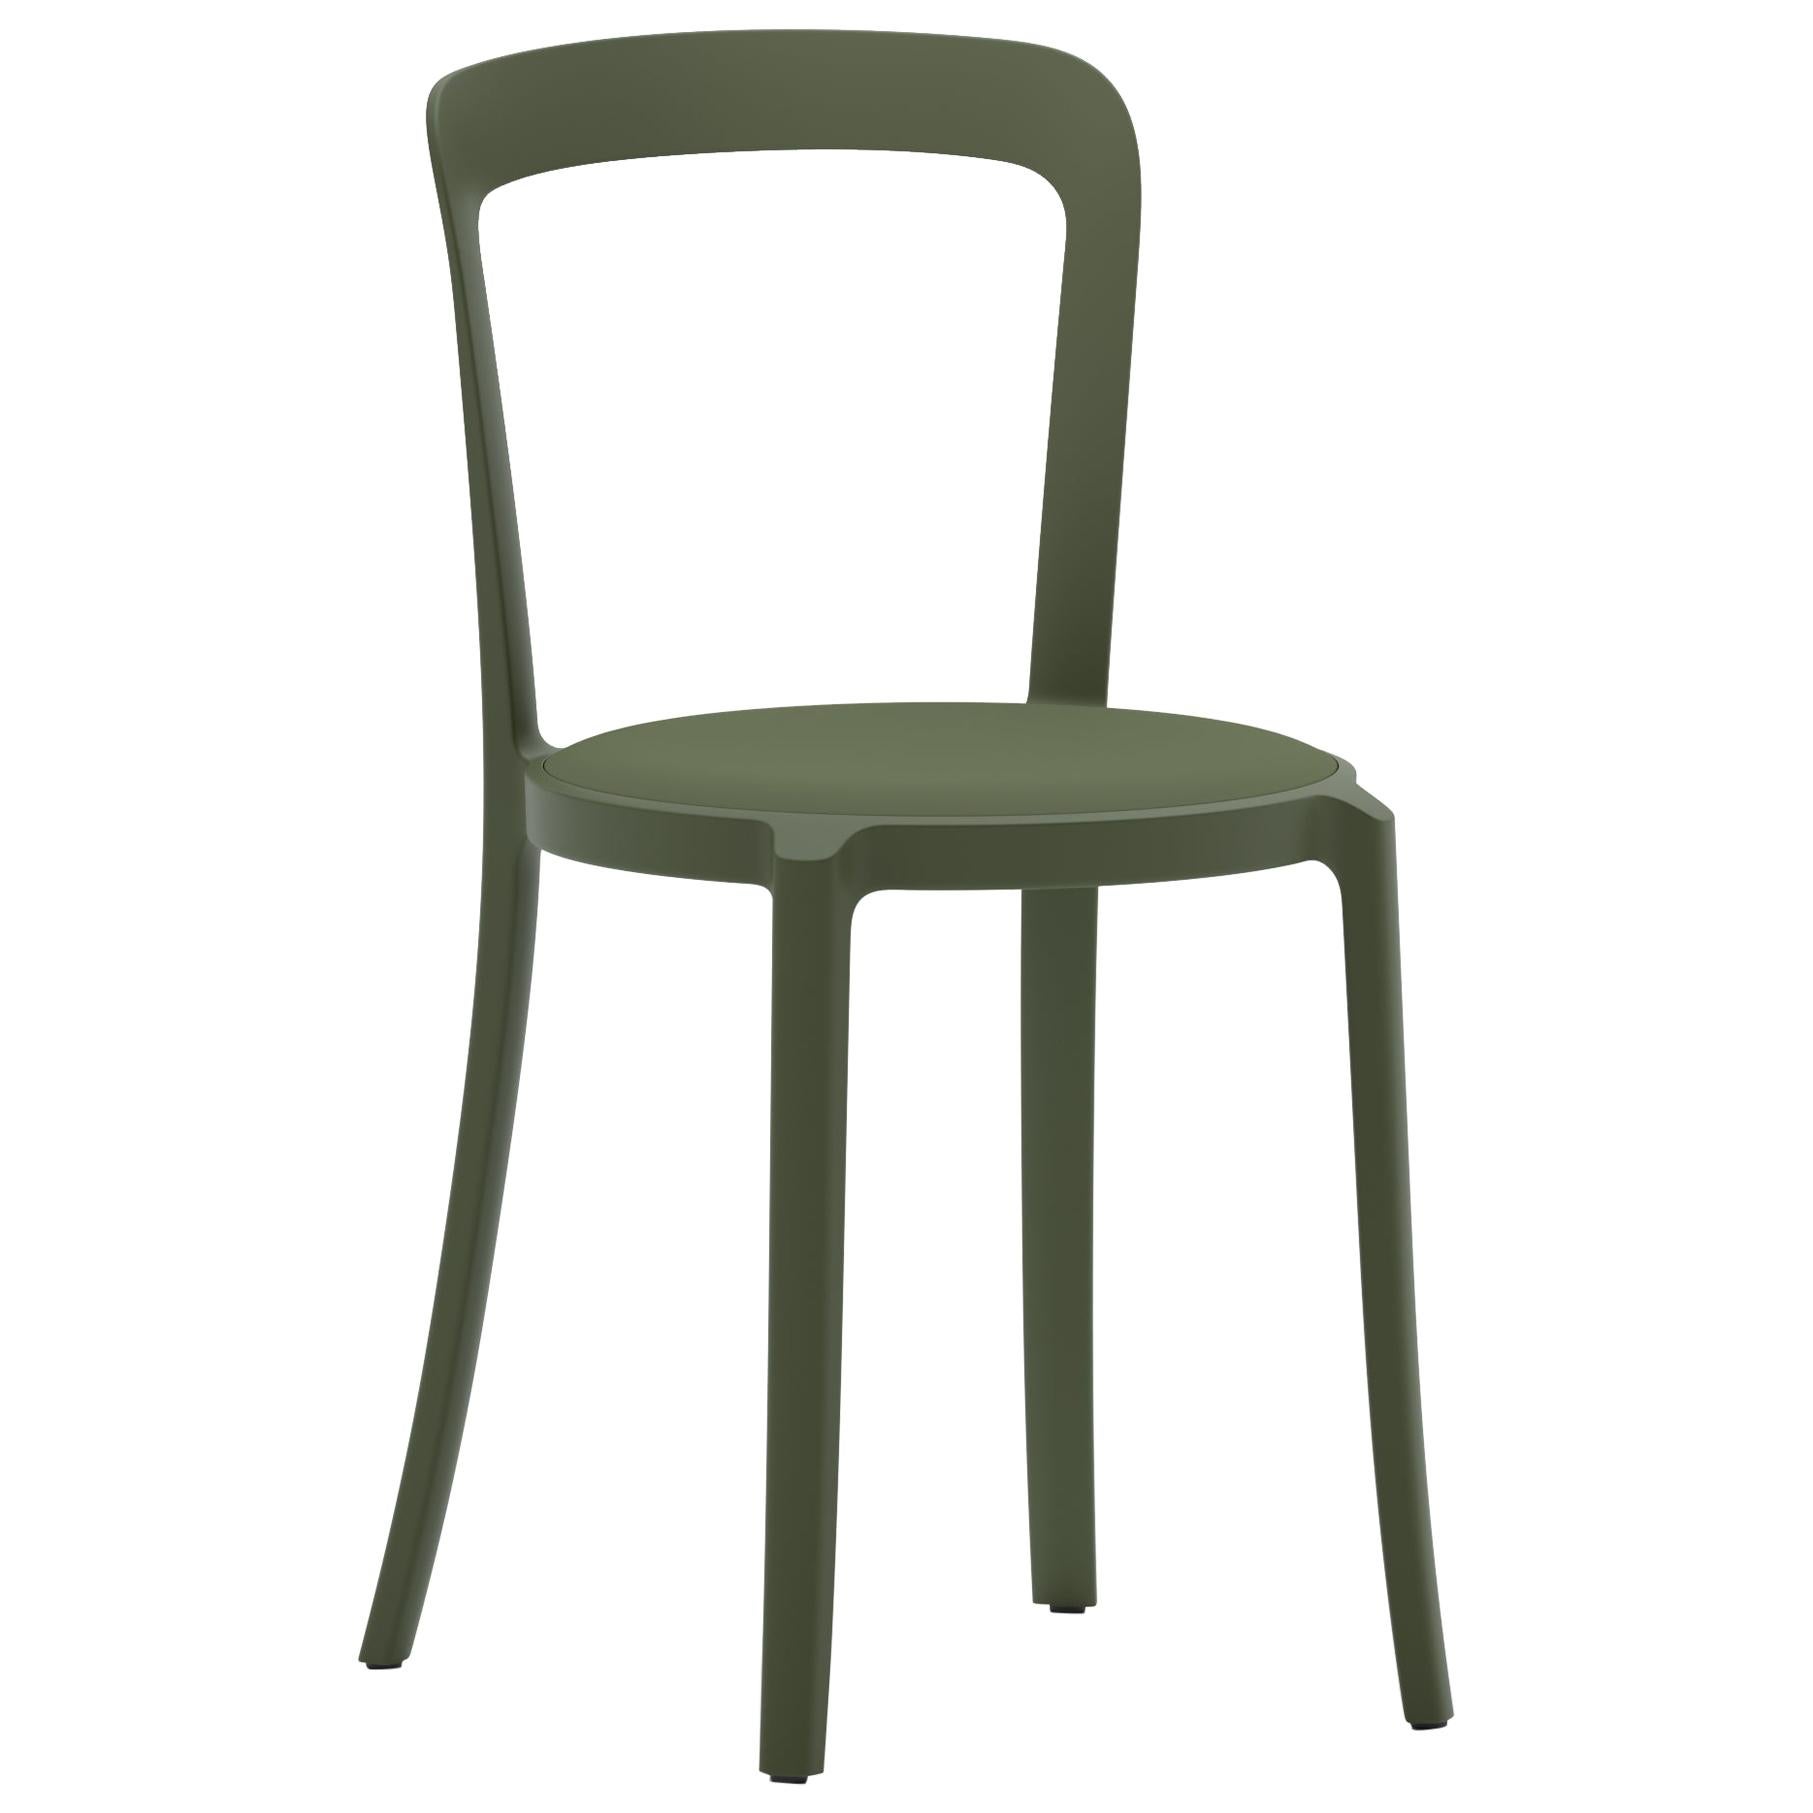 On & On Stacking Chair in Plastic with Green Fabric 1 by Barber & Osgerby